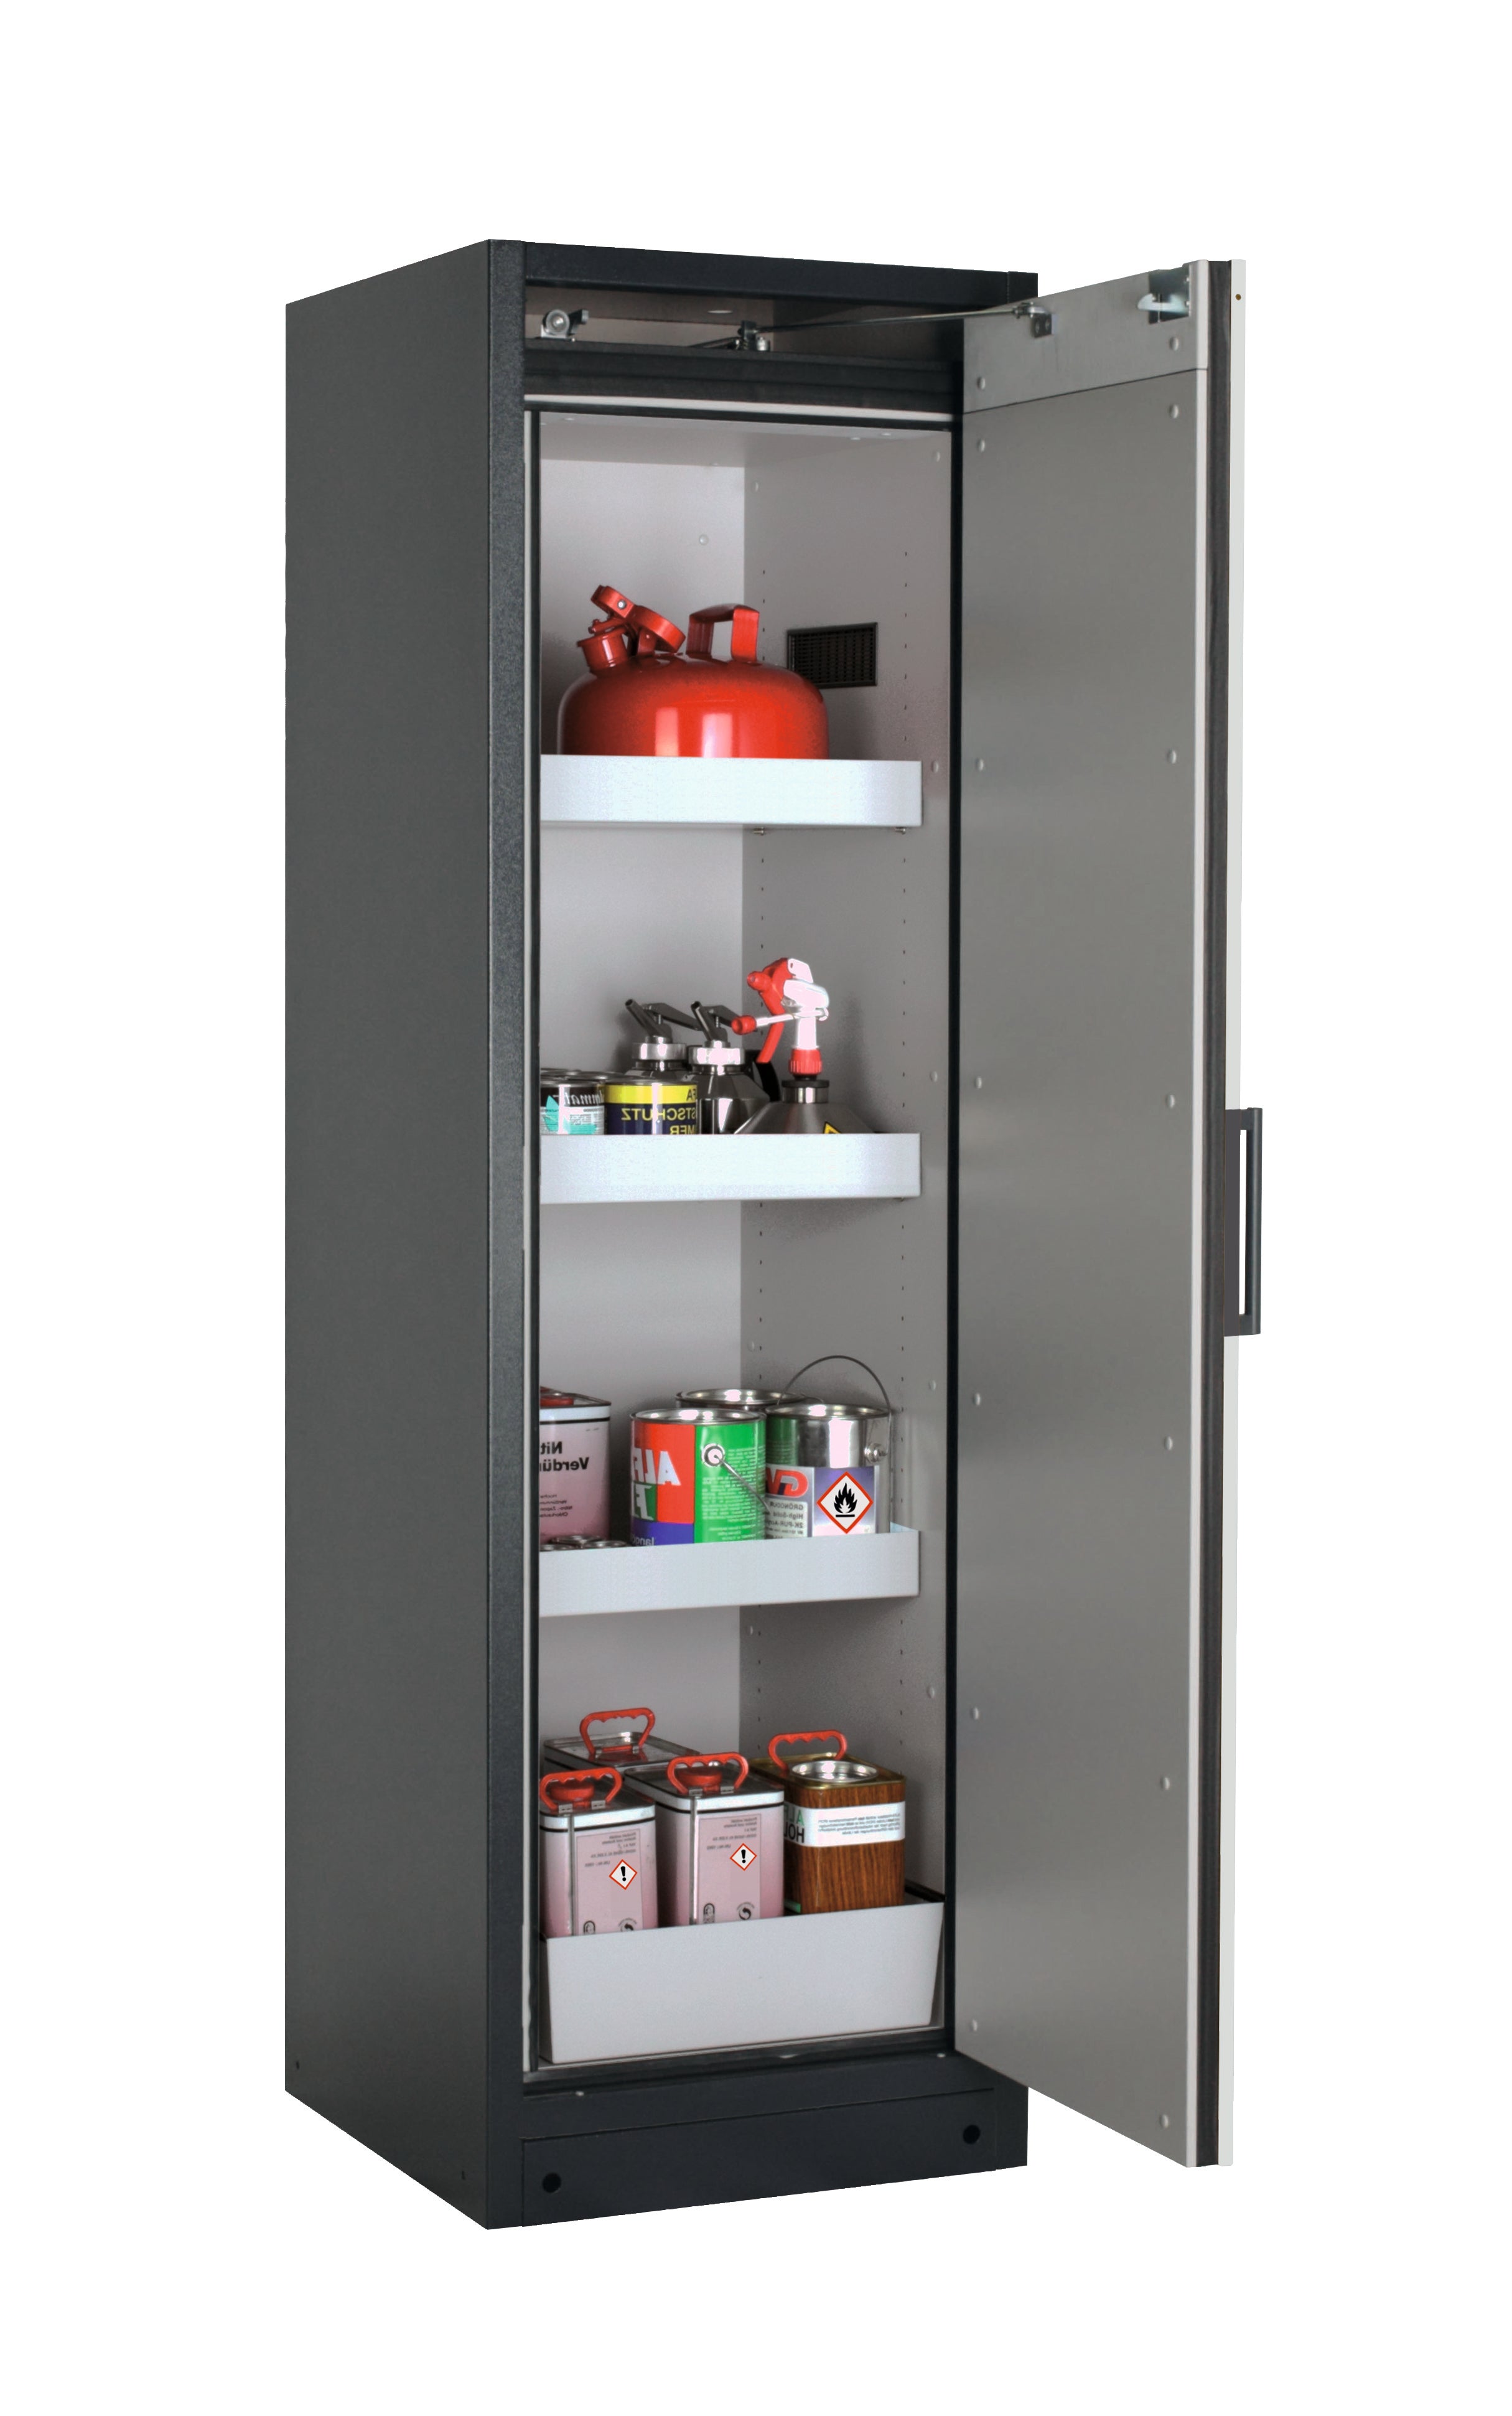 Type 90 safety storage cabinet Q-CLASSIC-90 model Q90.195.060.R in light grey RAL 7035 with 3x tray shelf (standard) (sheet steel),